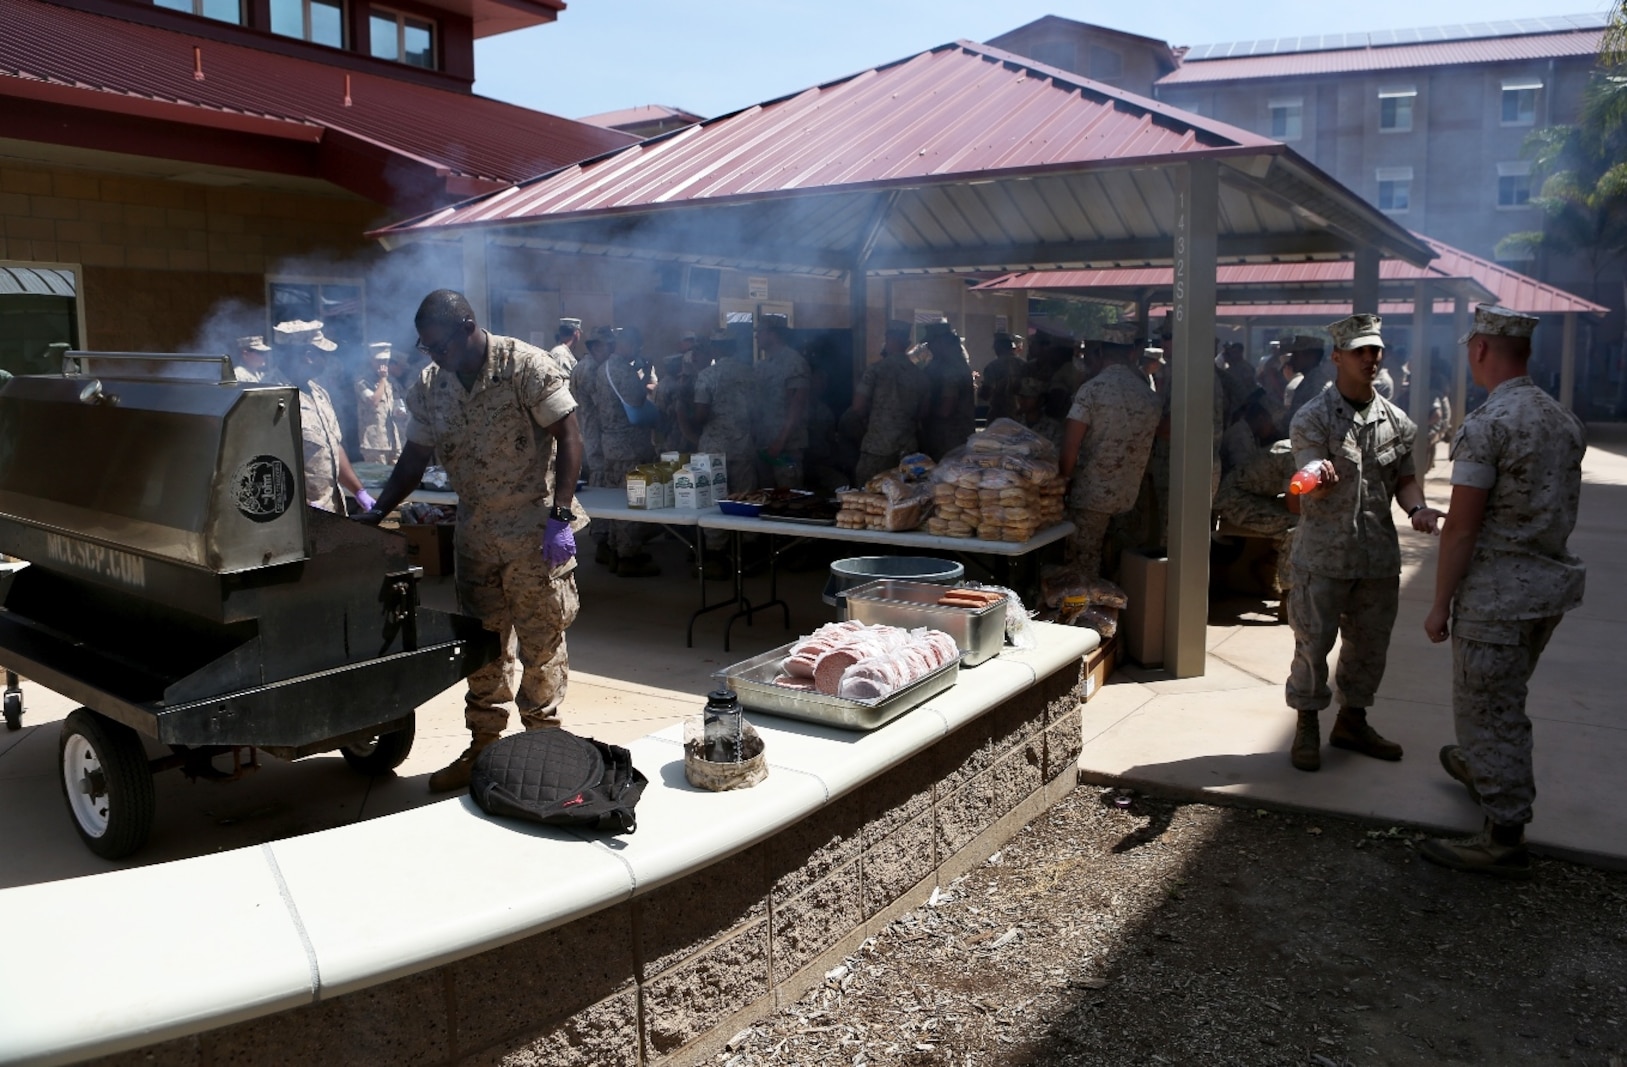 U.S. Marine non-commissioned officers and senior leaders from 7th Engineer Support Battalion participate in a cookout after the opening of their new NCO lounge, known as Chapultepec’s, in their barracks building aboard Camp Pendleton, Calif., April 15, 2016. The newly opened lounge is dedicated to give the NCOs a place in the barracks to come together and unwind, forming stronger camaraderie in their ranks. (U.S. Marine Corps photo by Cpl. Carson Gramley/released)